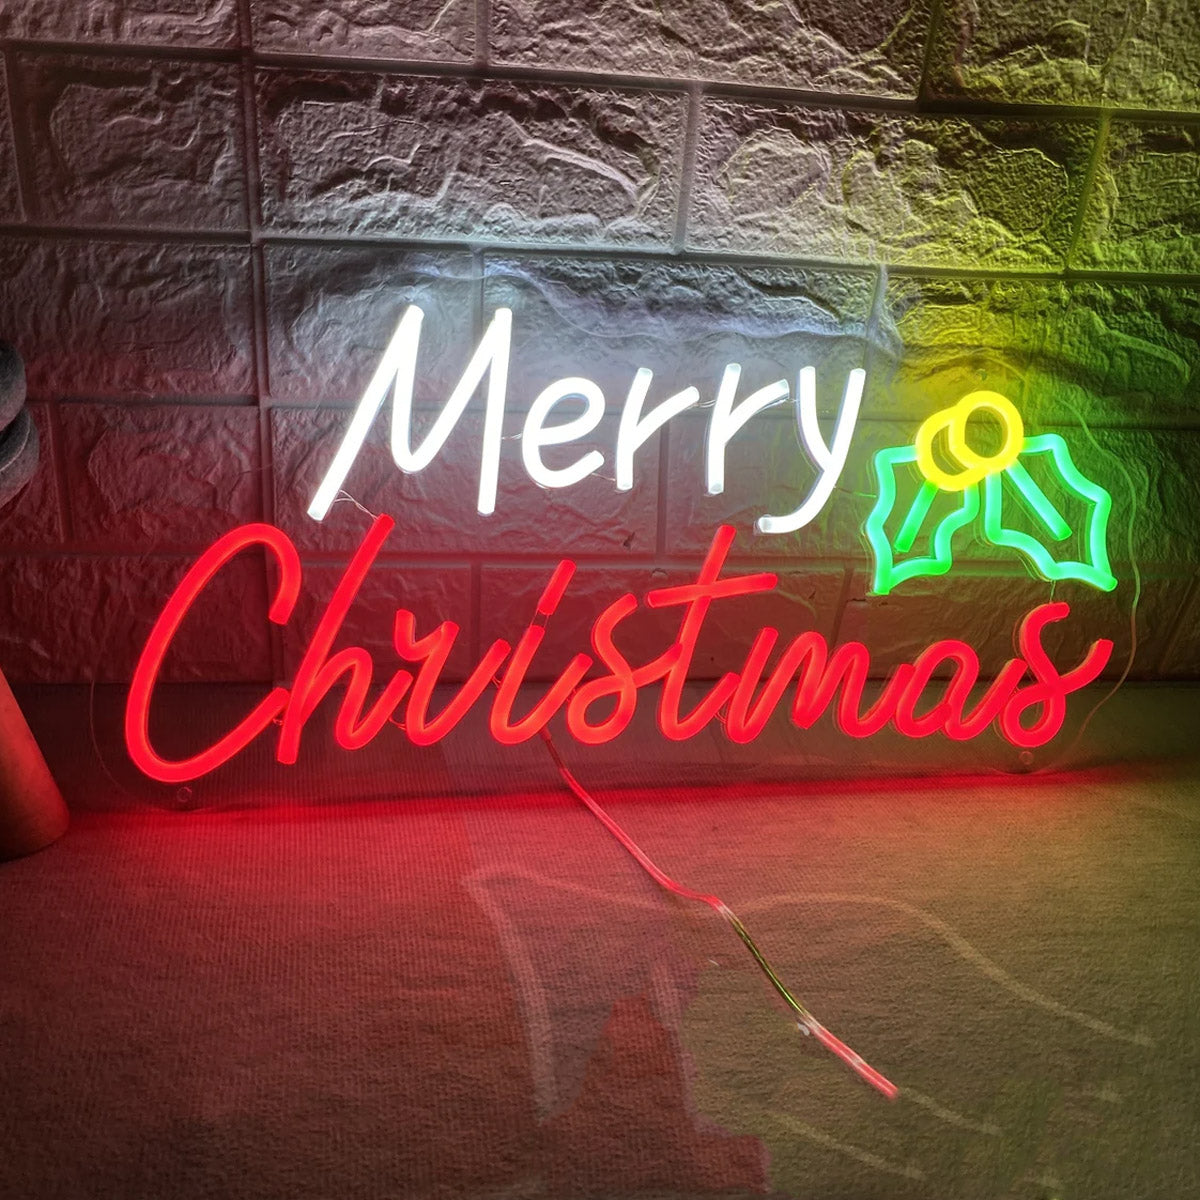 NEONIP-100% Handmade Party Home Bedroom Christmas Neon Sign Party Decoration